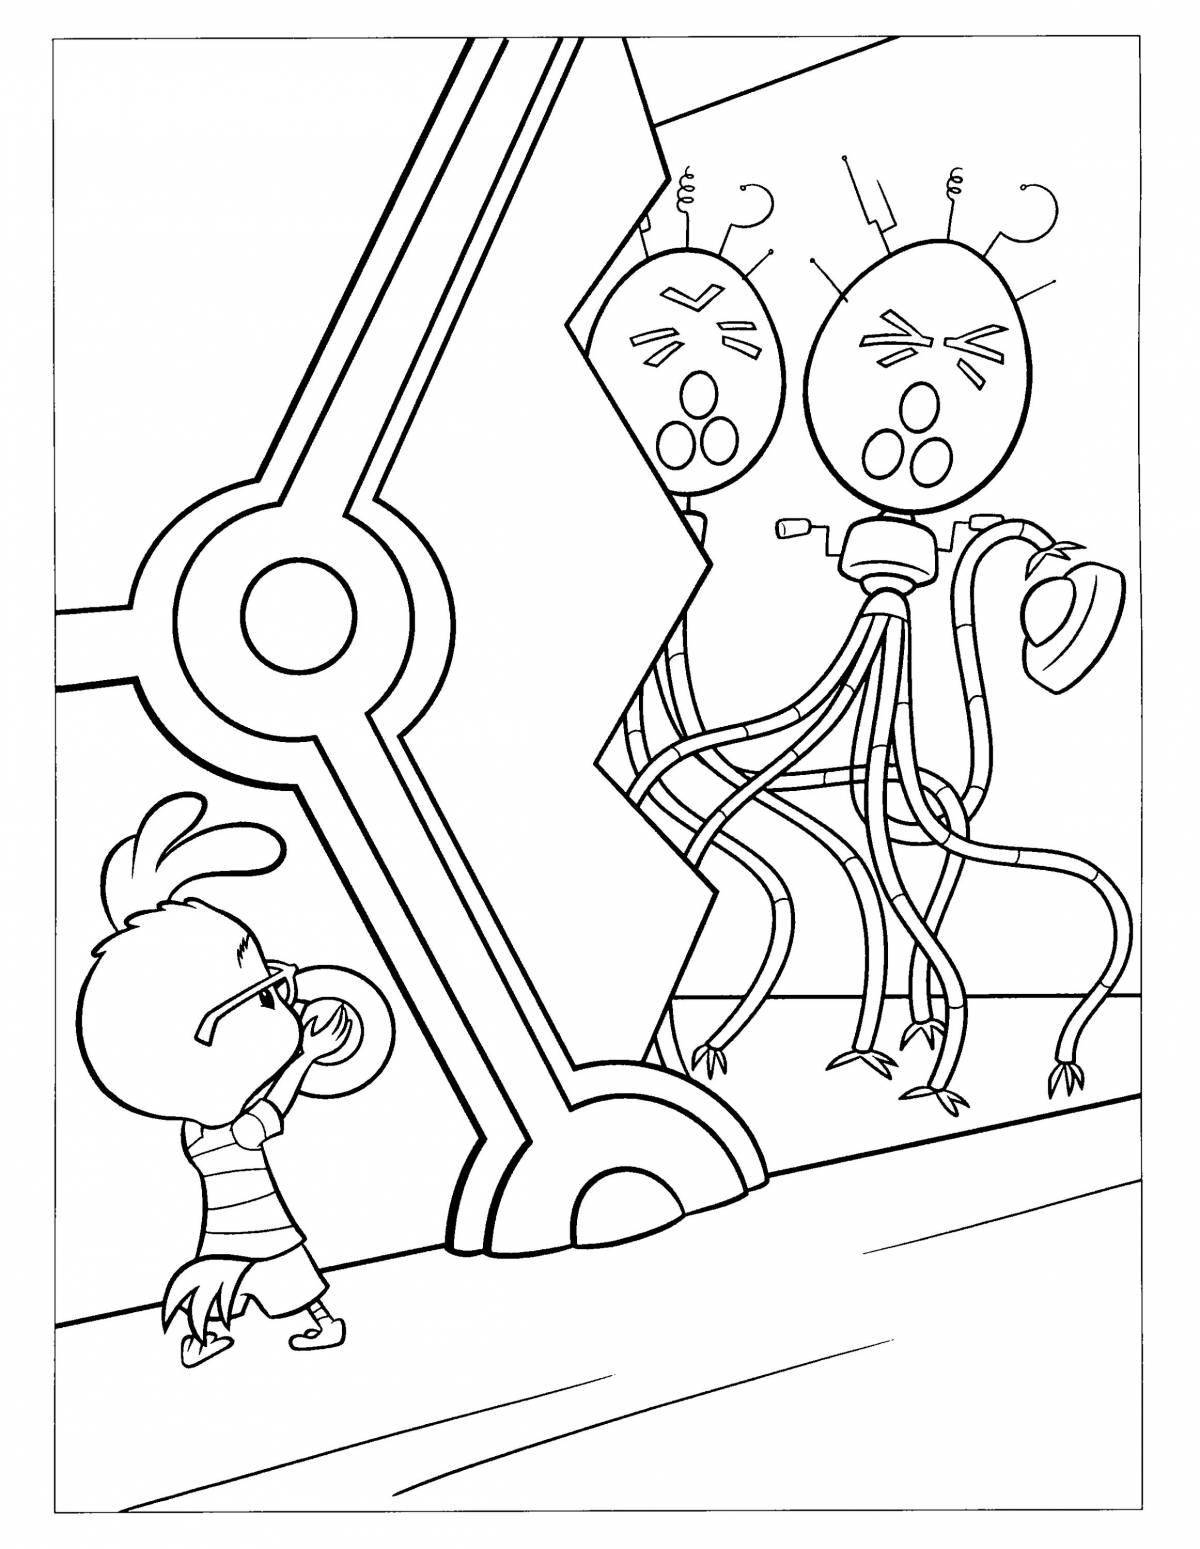 Animated chick coloring page